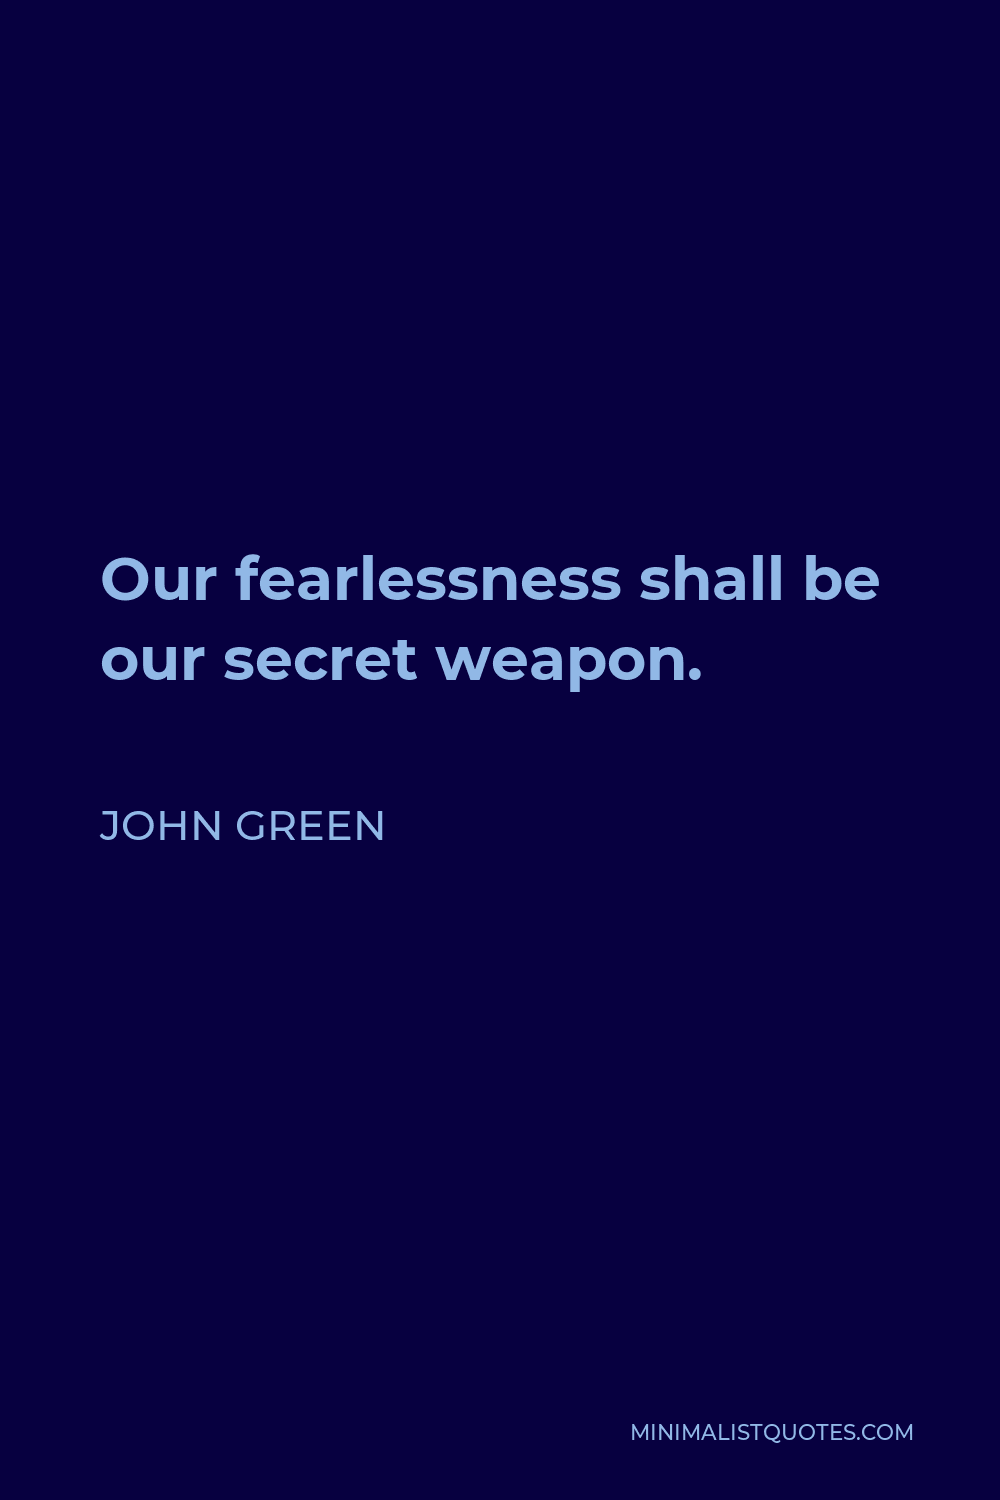 John Green Quote - Our fearlessness shall be our secret weapon.